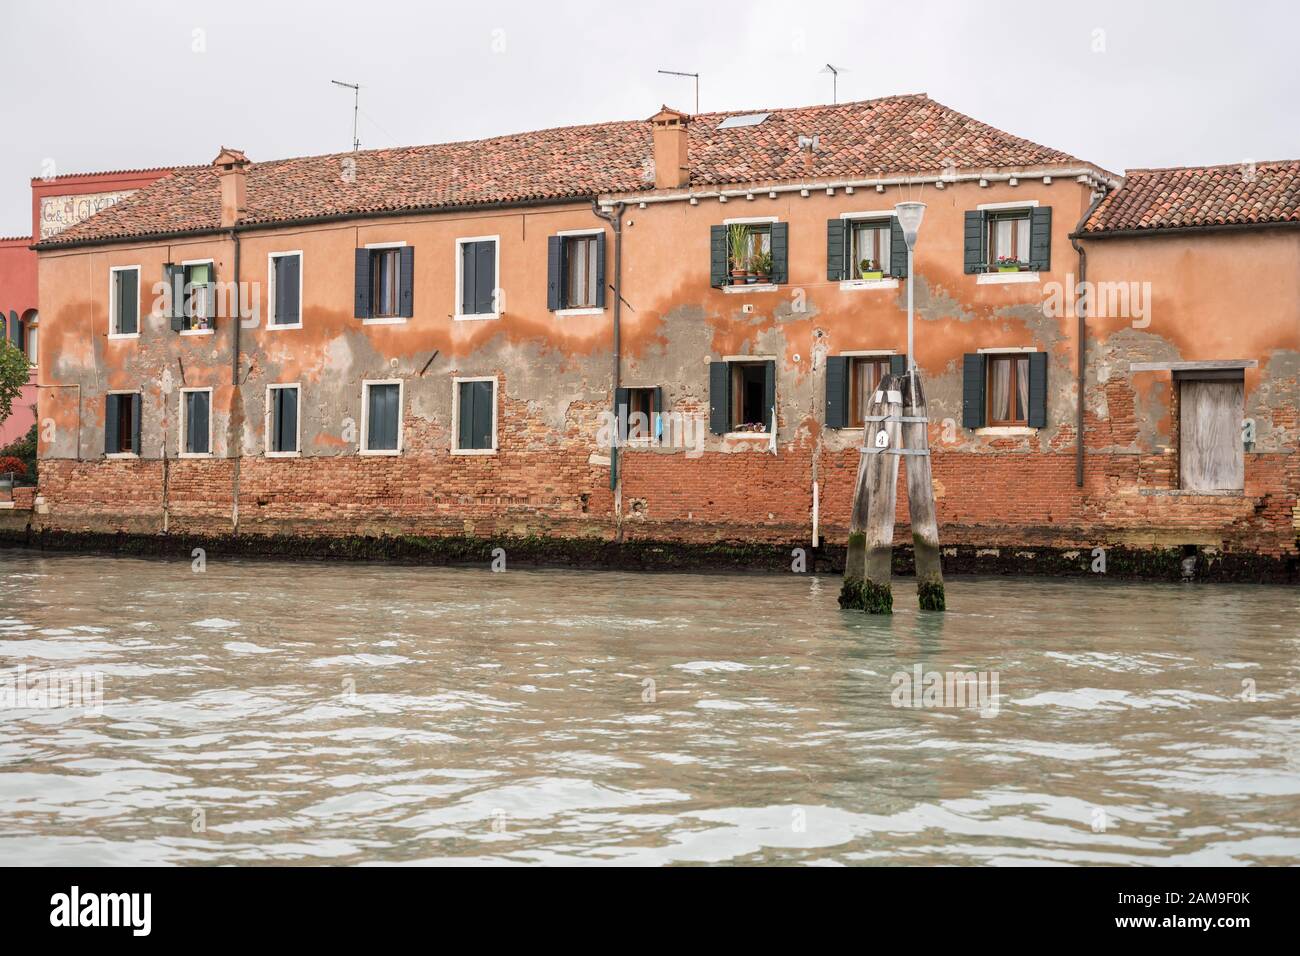 rising damp effects on plaster facade of traditional houses on canal, shot in bright fall light at Murano, Venice, Veneto, Italy Stock Photo